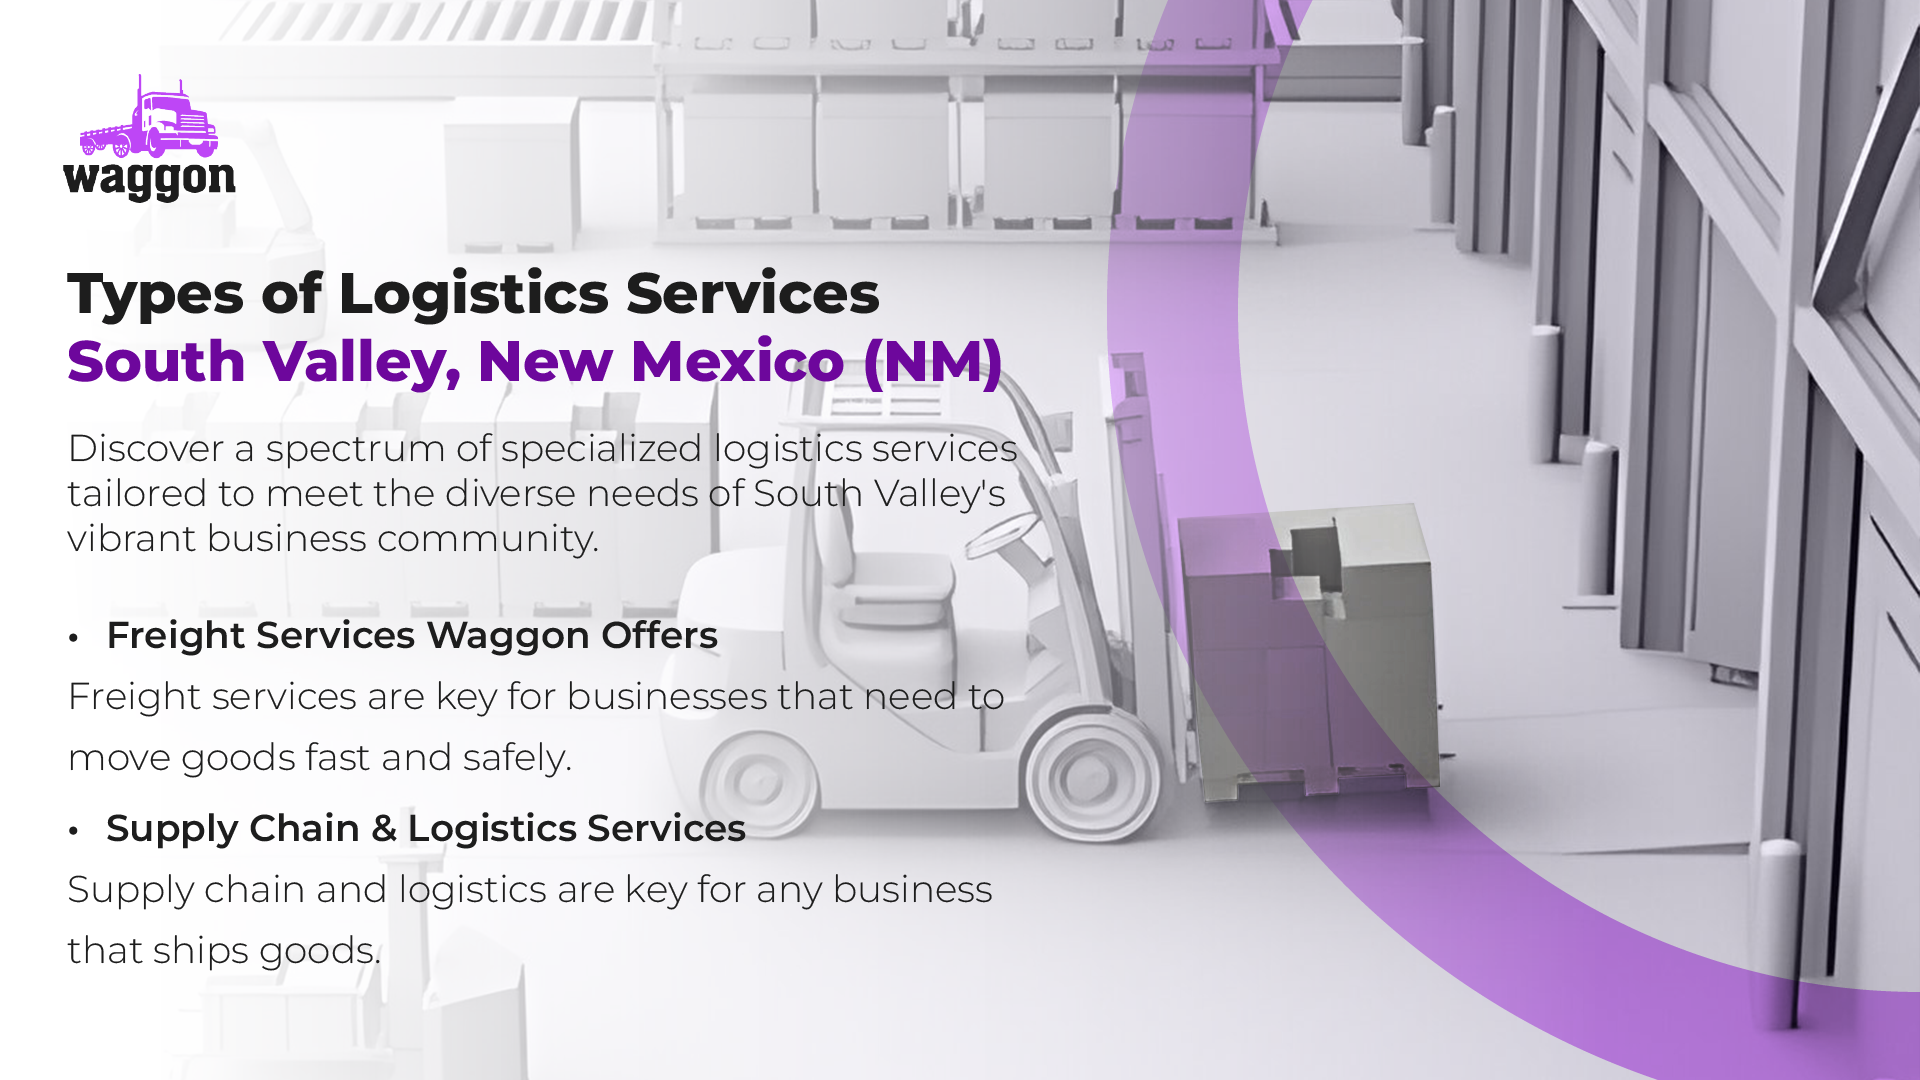 Types of Logistics Services in South Valley, New Mexico (NM)